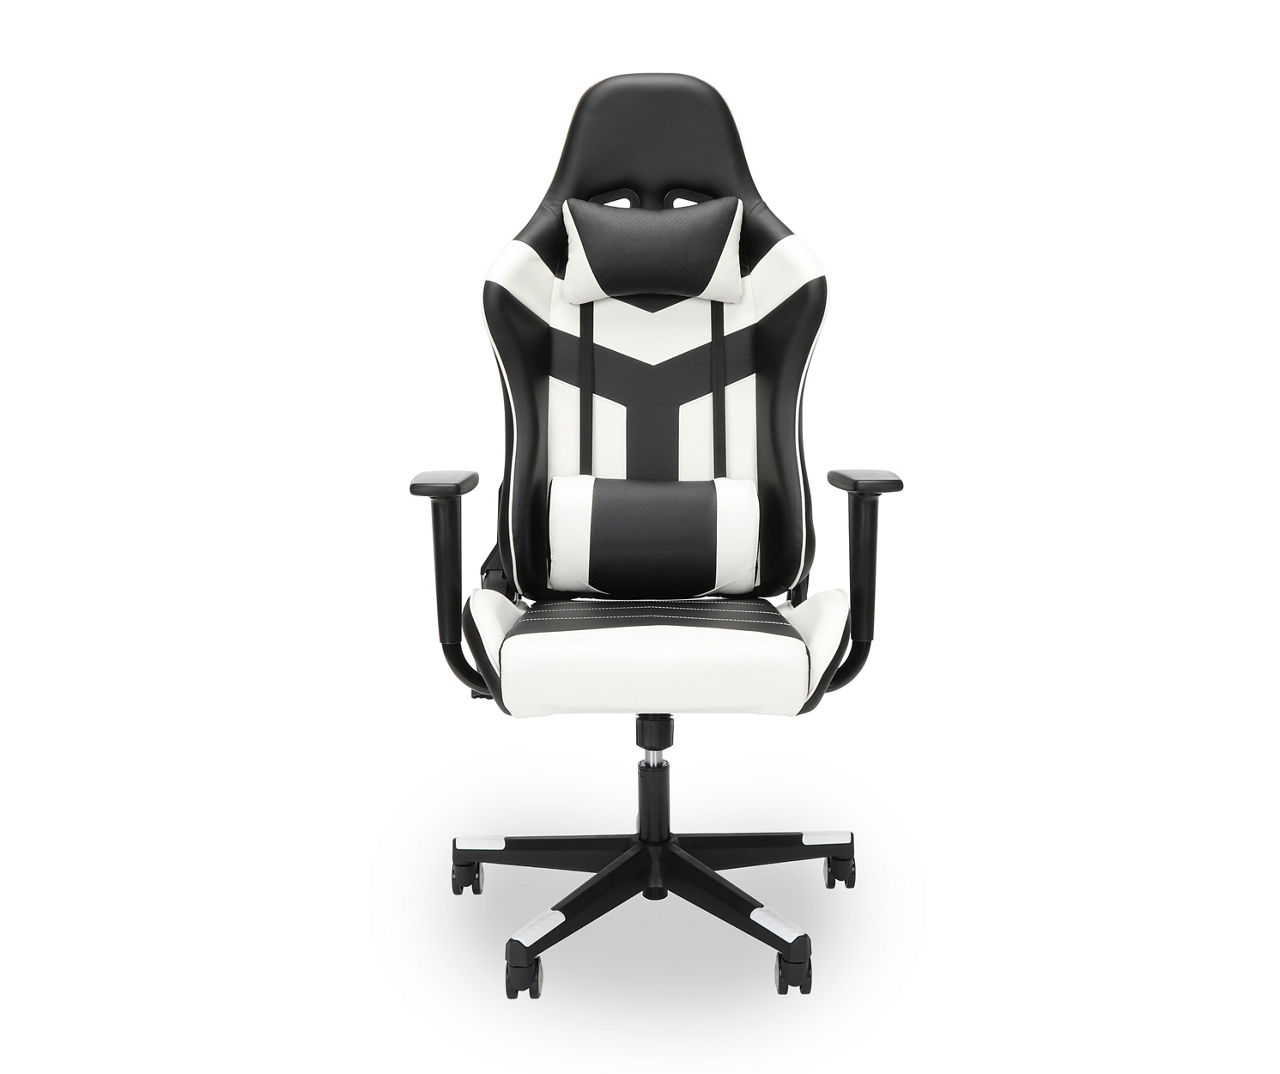 OFM RACING WHT GAMING CHAIR